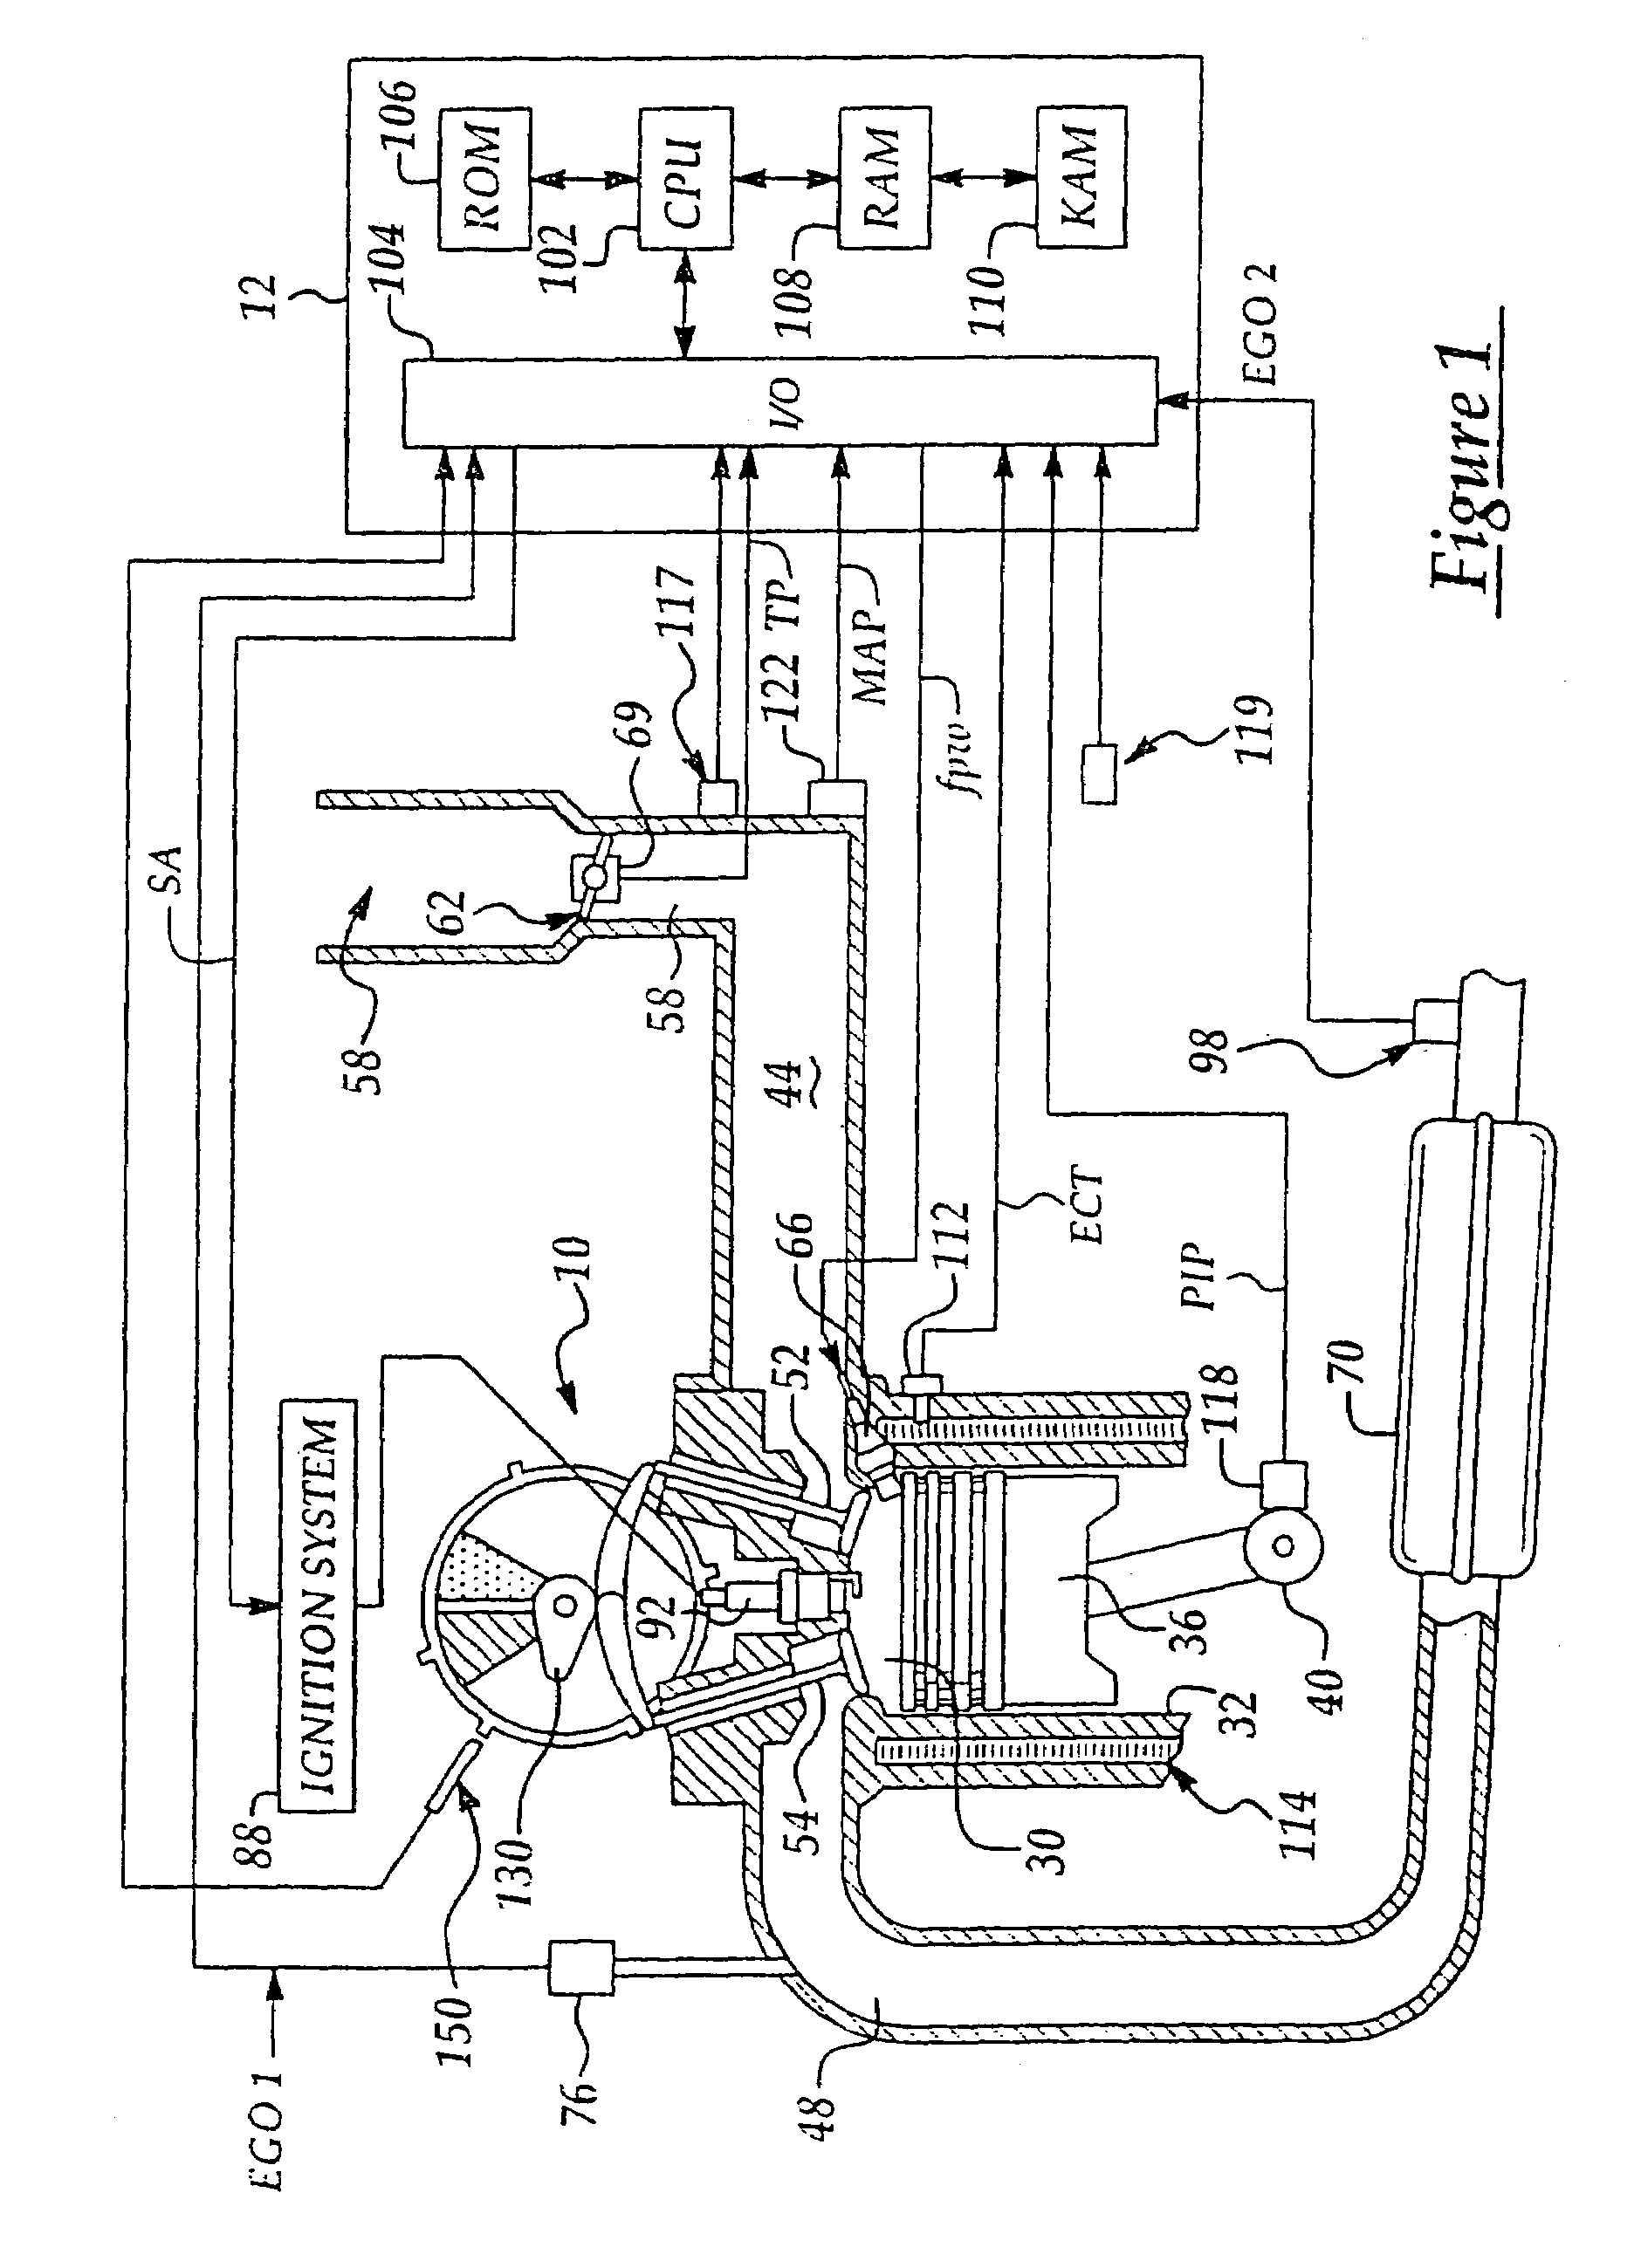 Engine air amount prediction based on engine position